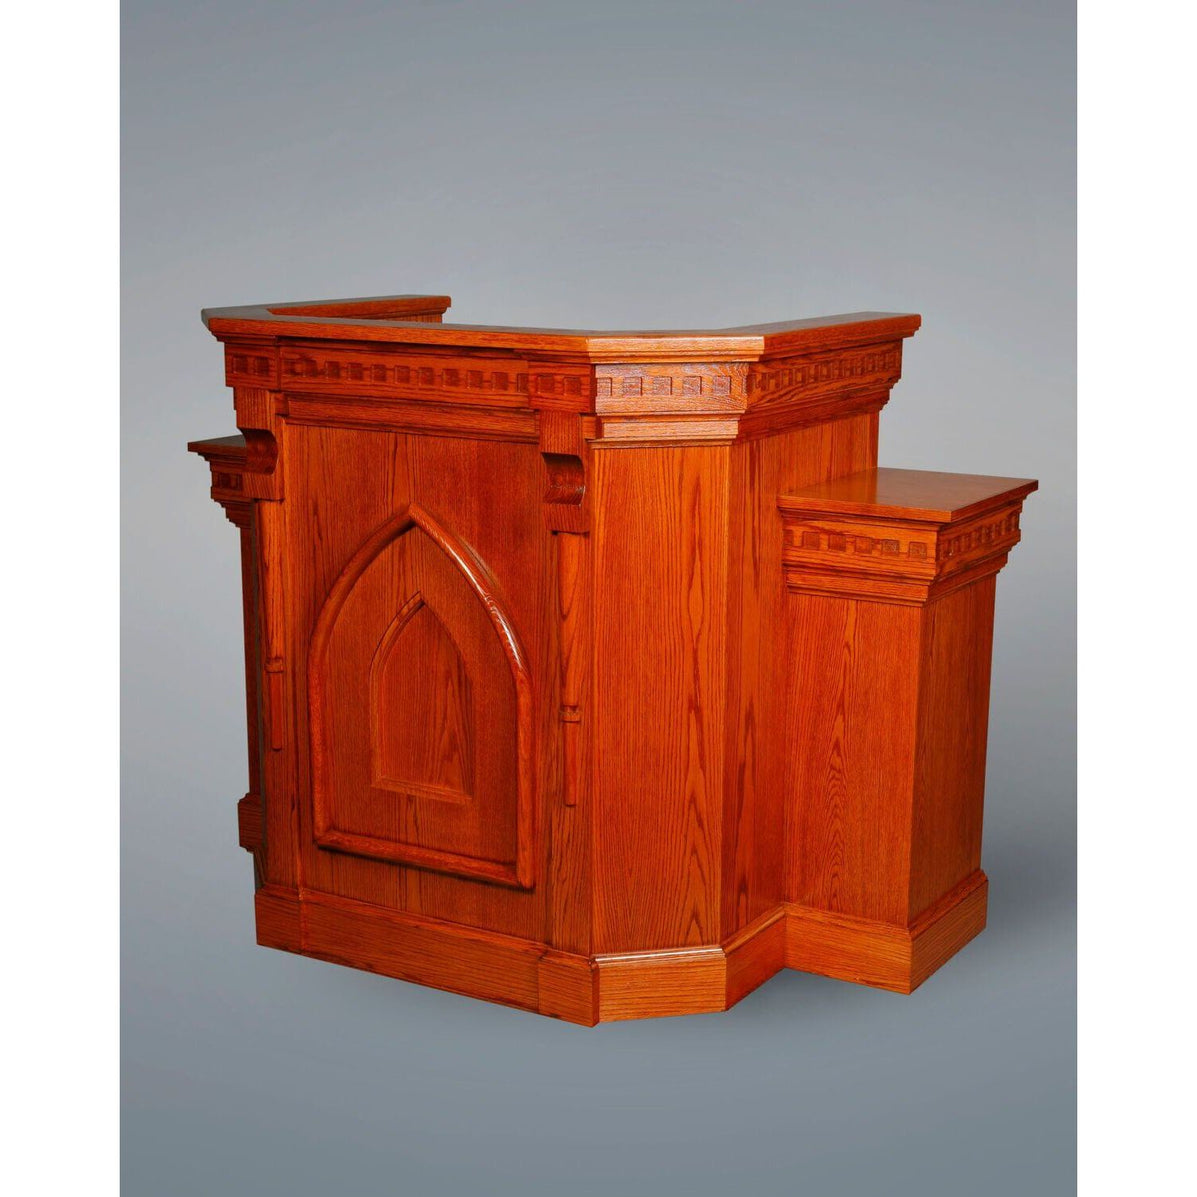 900W-2 Winged pulpit from the side